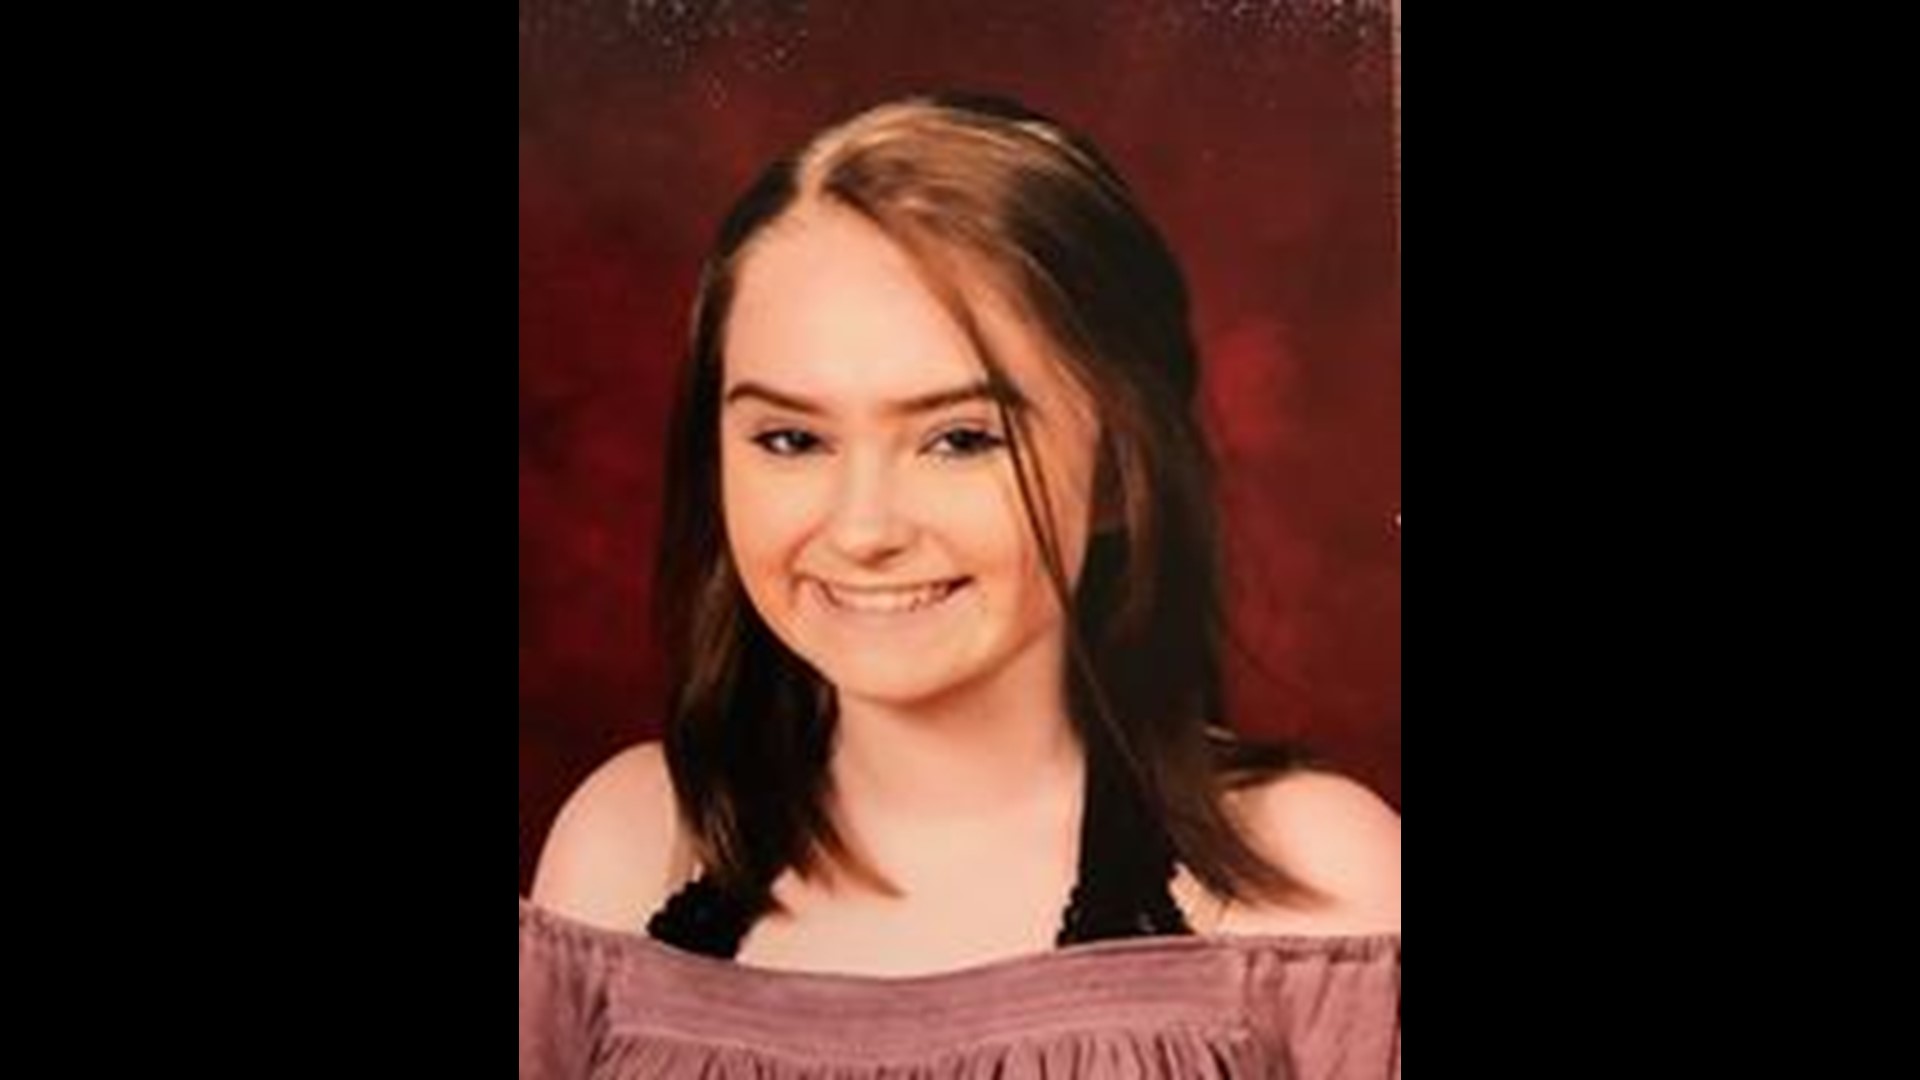 Update Missing 15 Year Old Girl Located In Adams County 7940